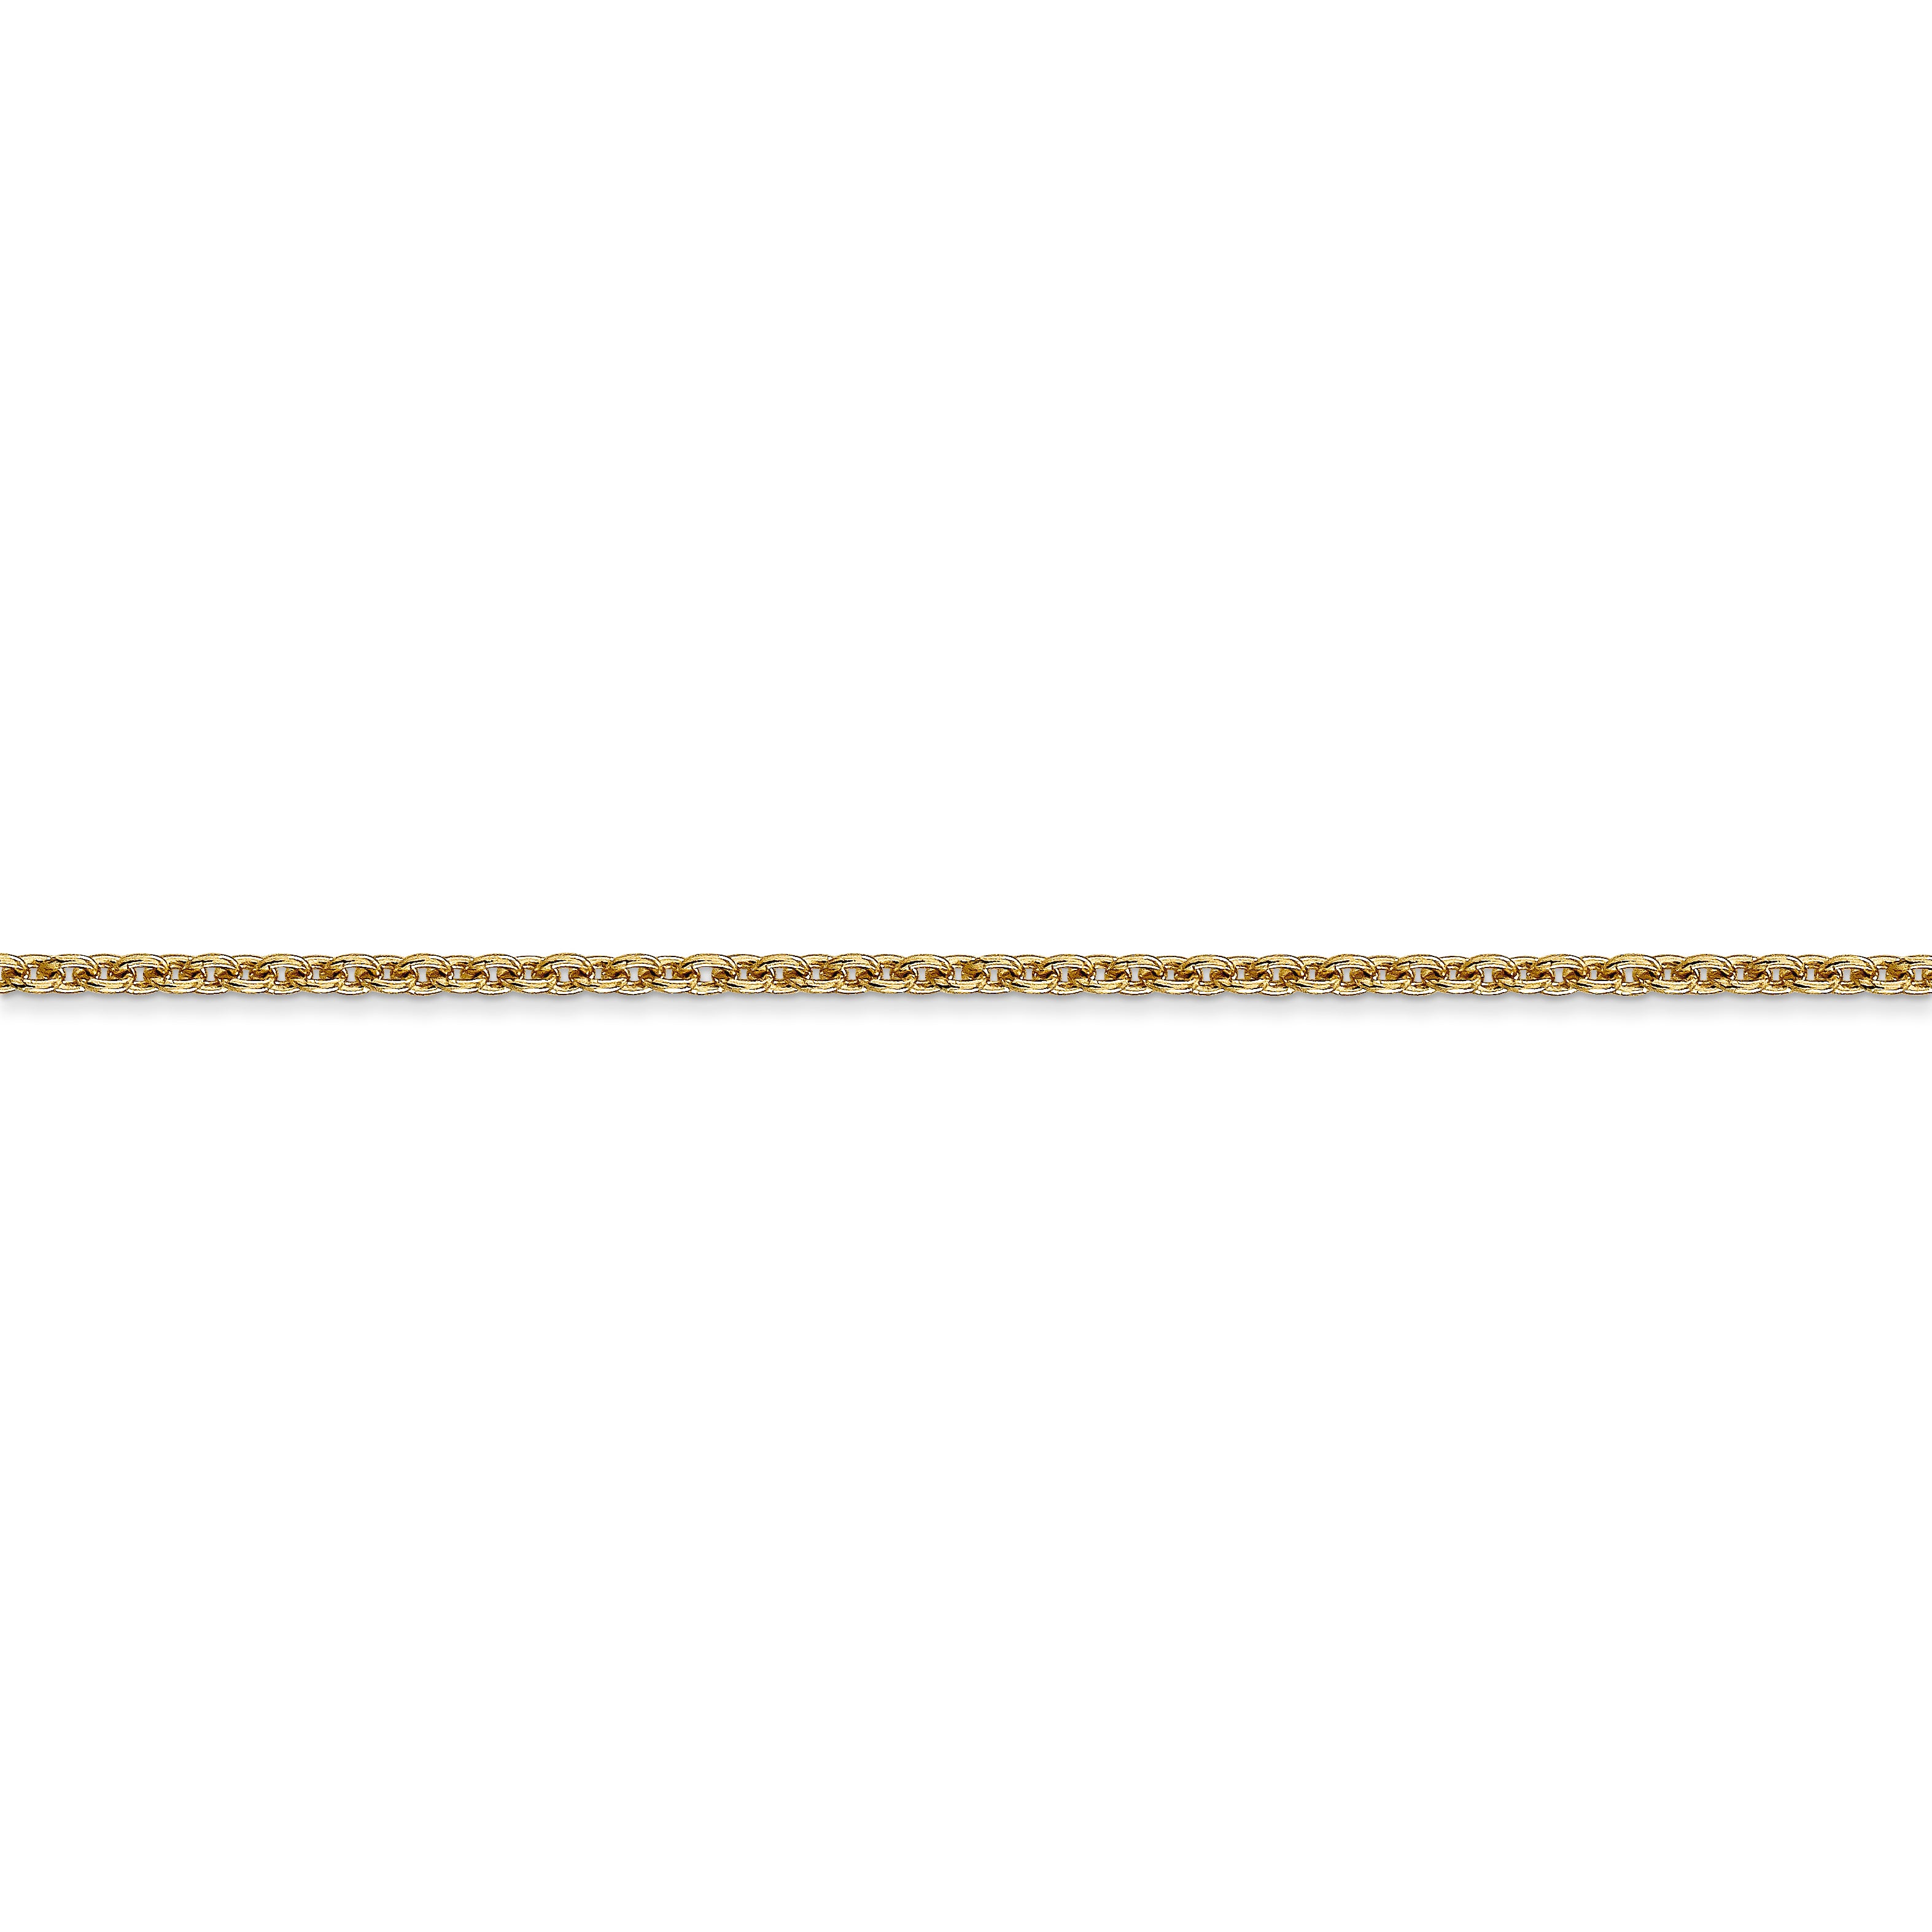 14k 1.8mm Forzantine Cable Chain